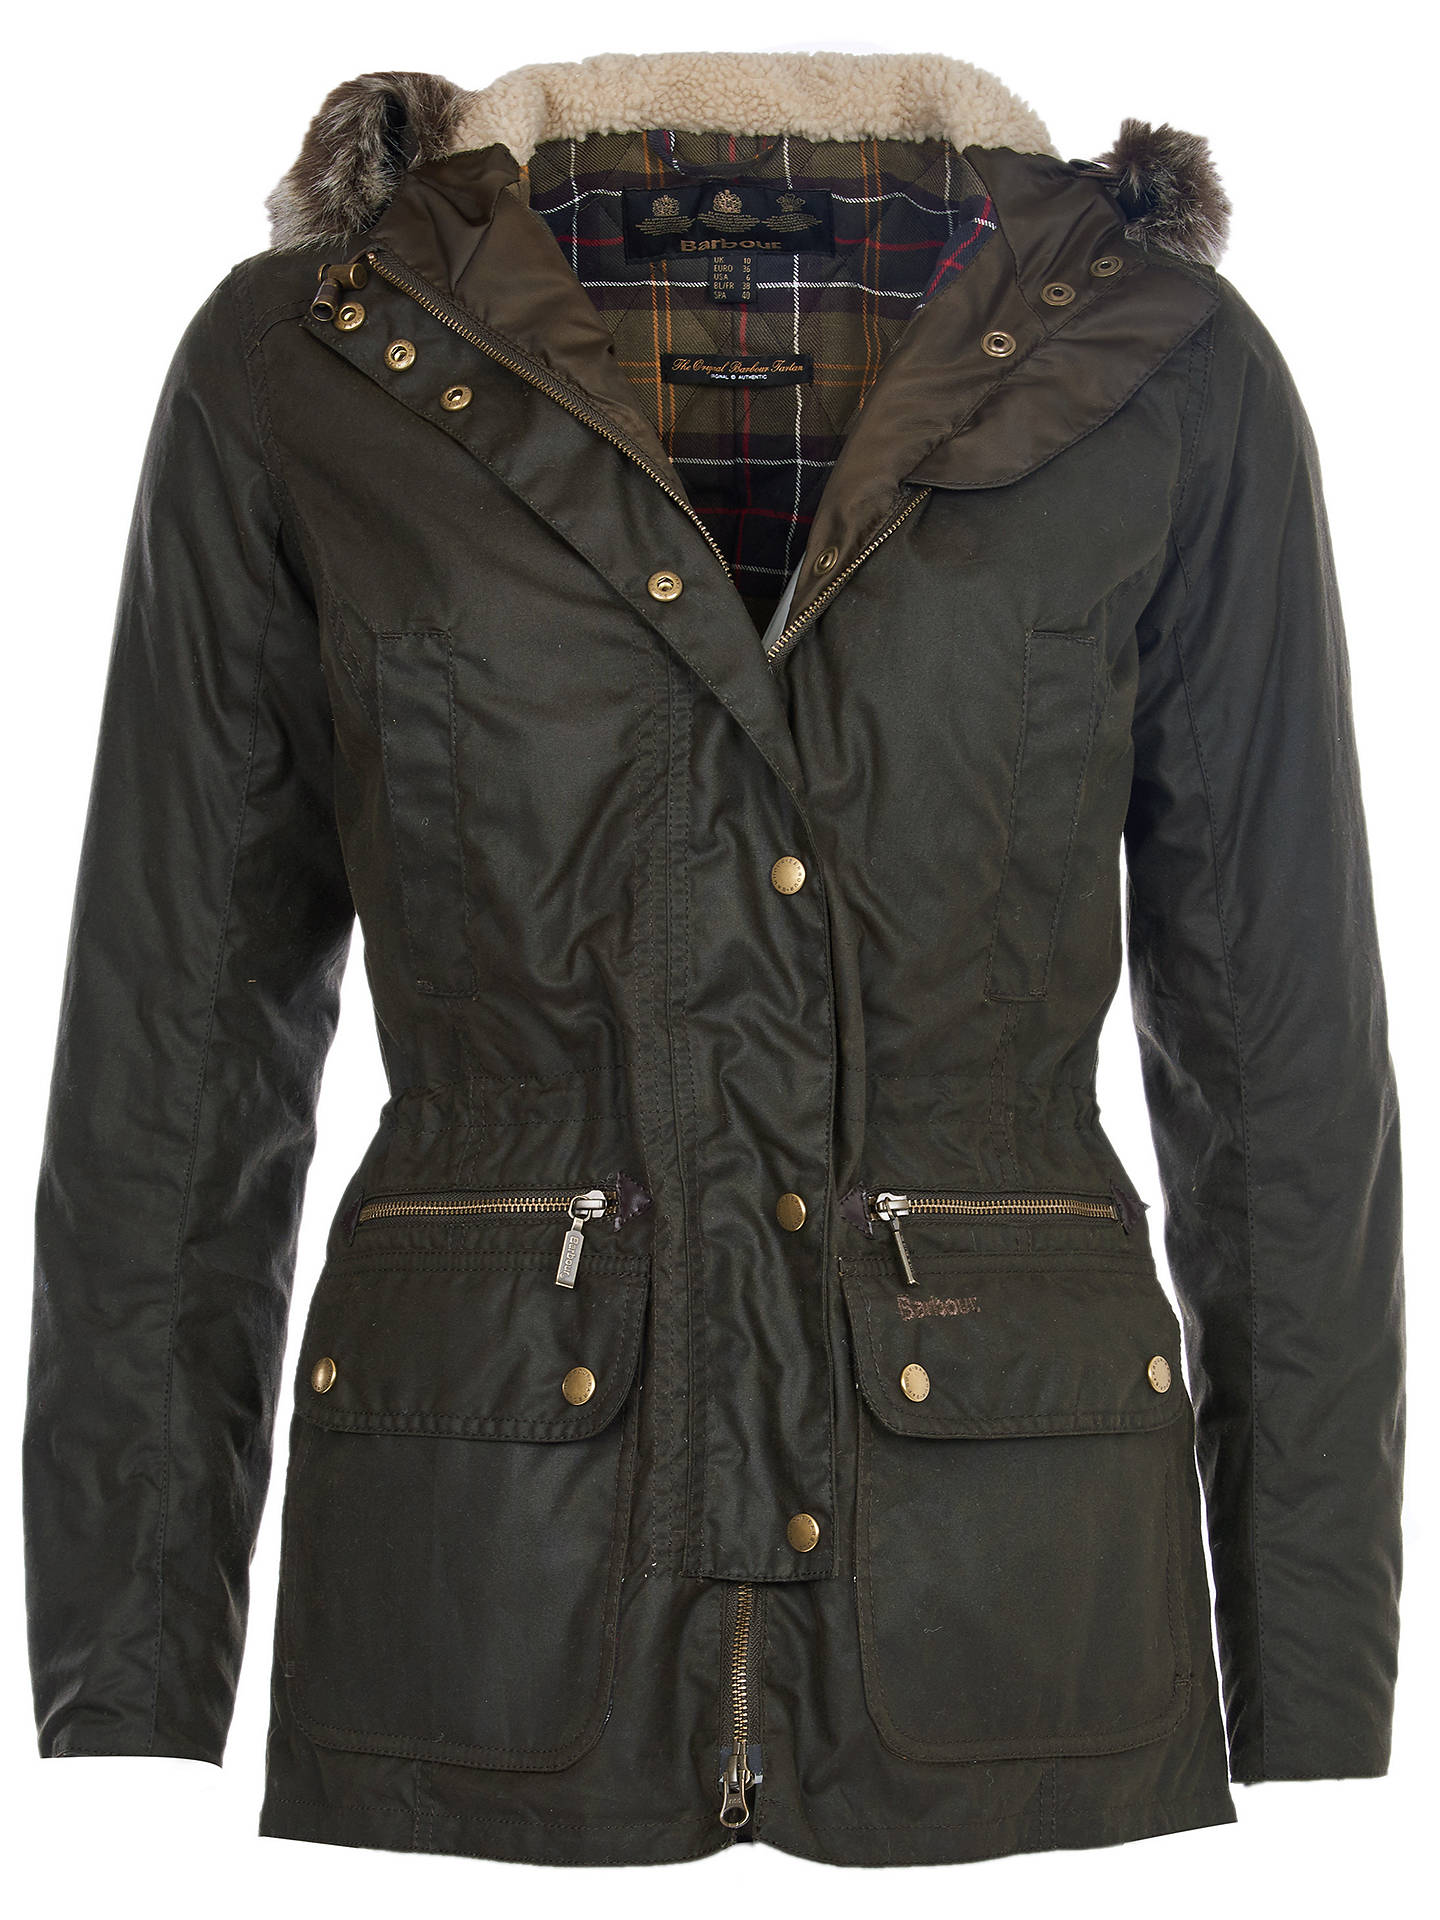 Barbour Kelsall Waxed Hooded Jacket, Olive at John Lewis & Partners